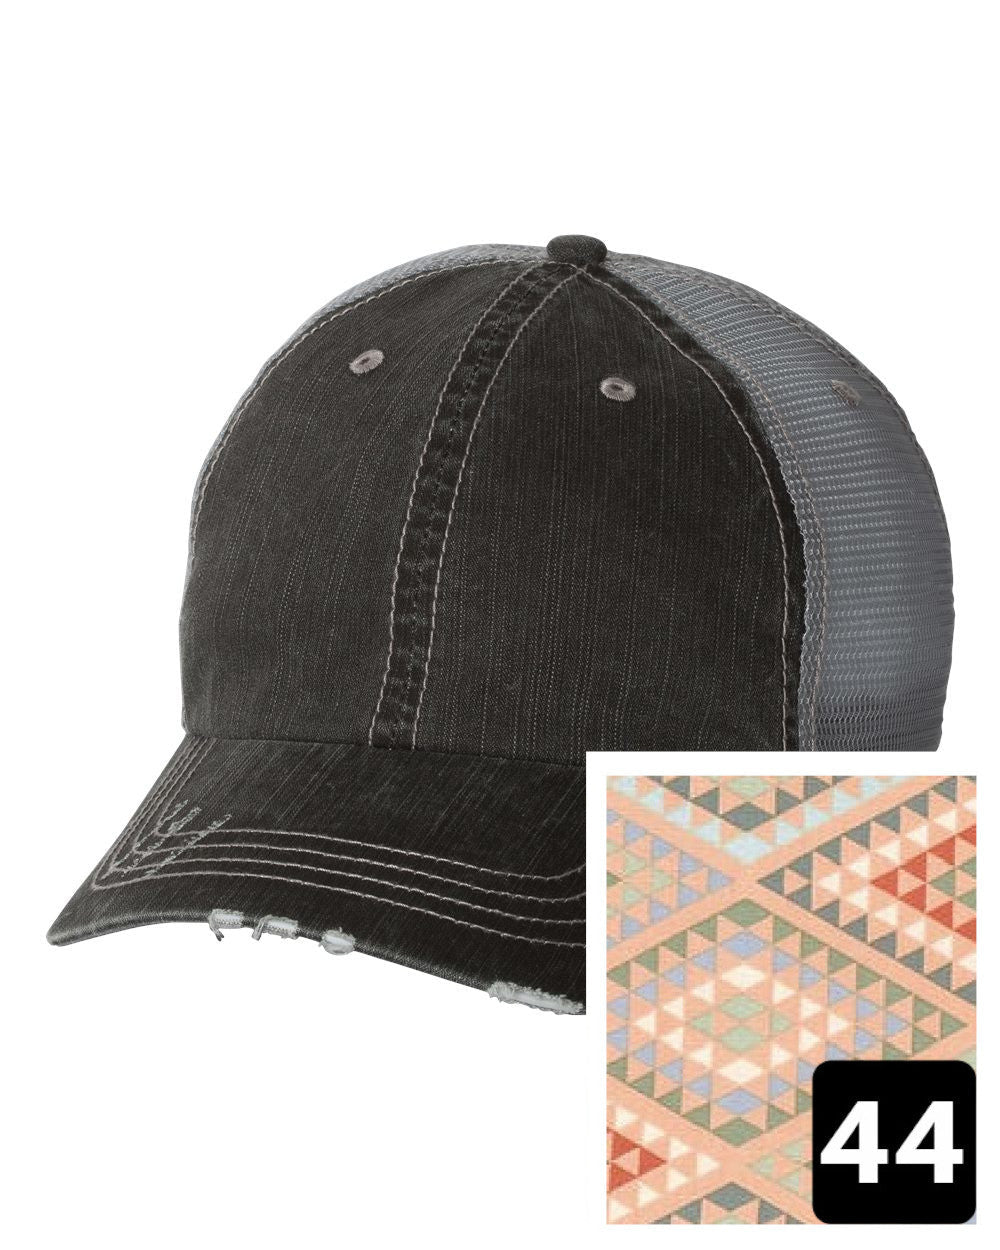 gray distressed trucker hat with navy coral and white chevron fabric state of Florida